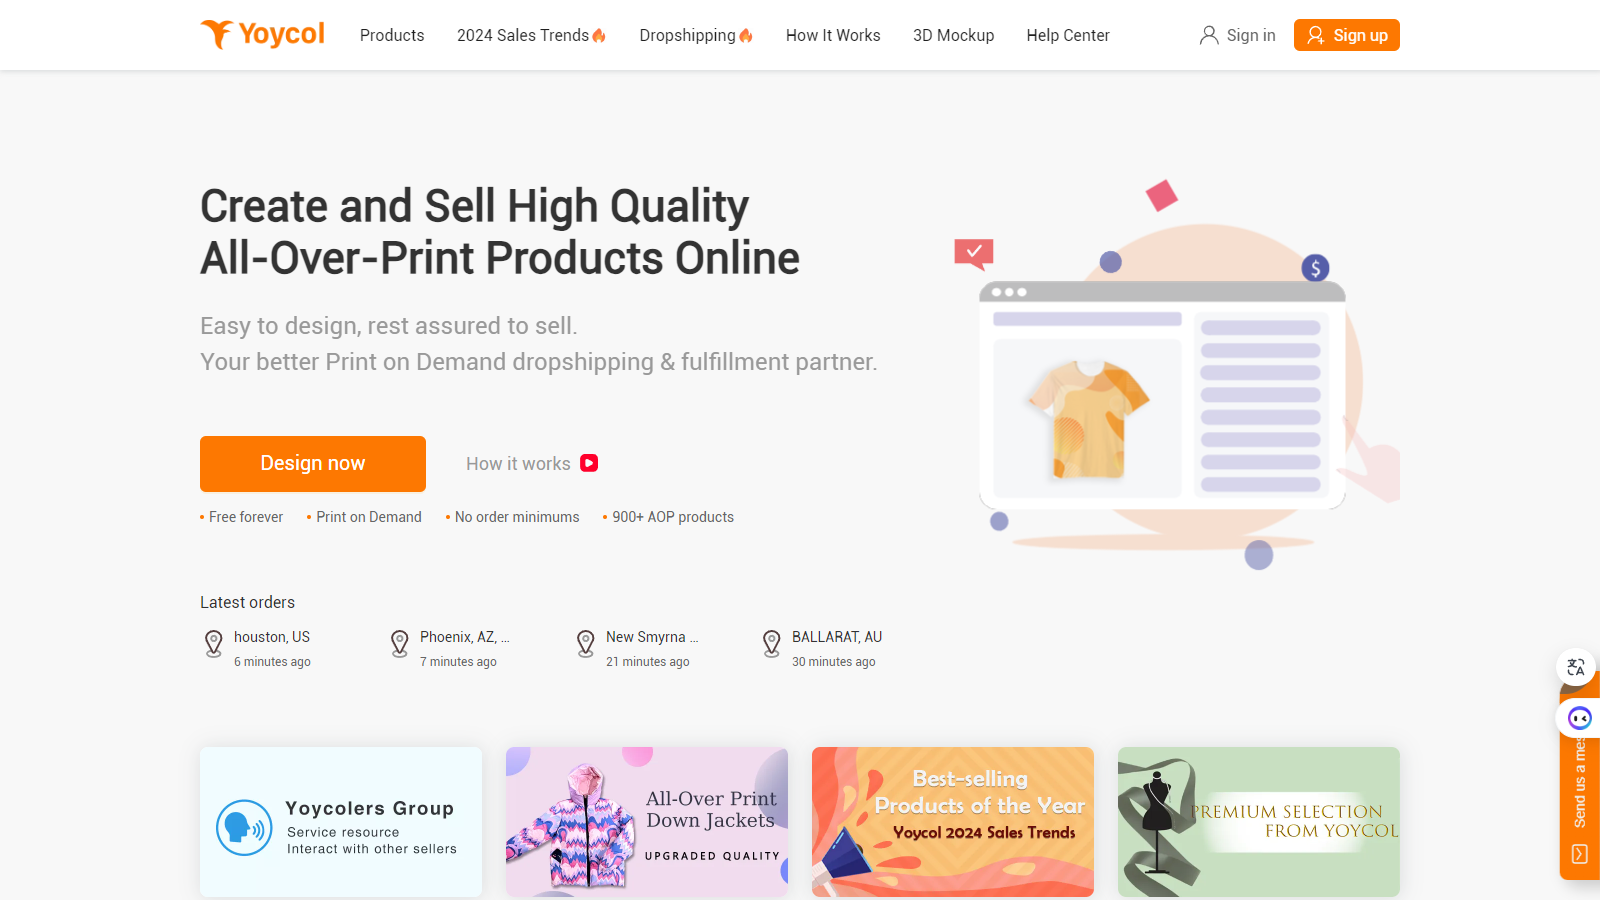 All-Over-Print dropshipping & fulfillment partner